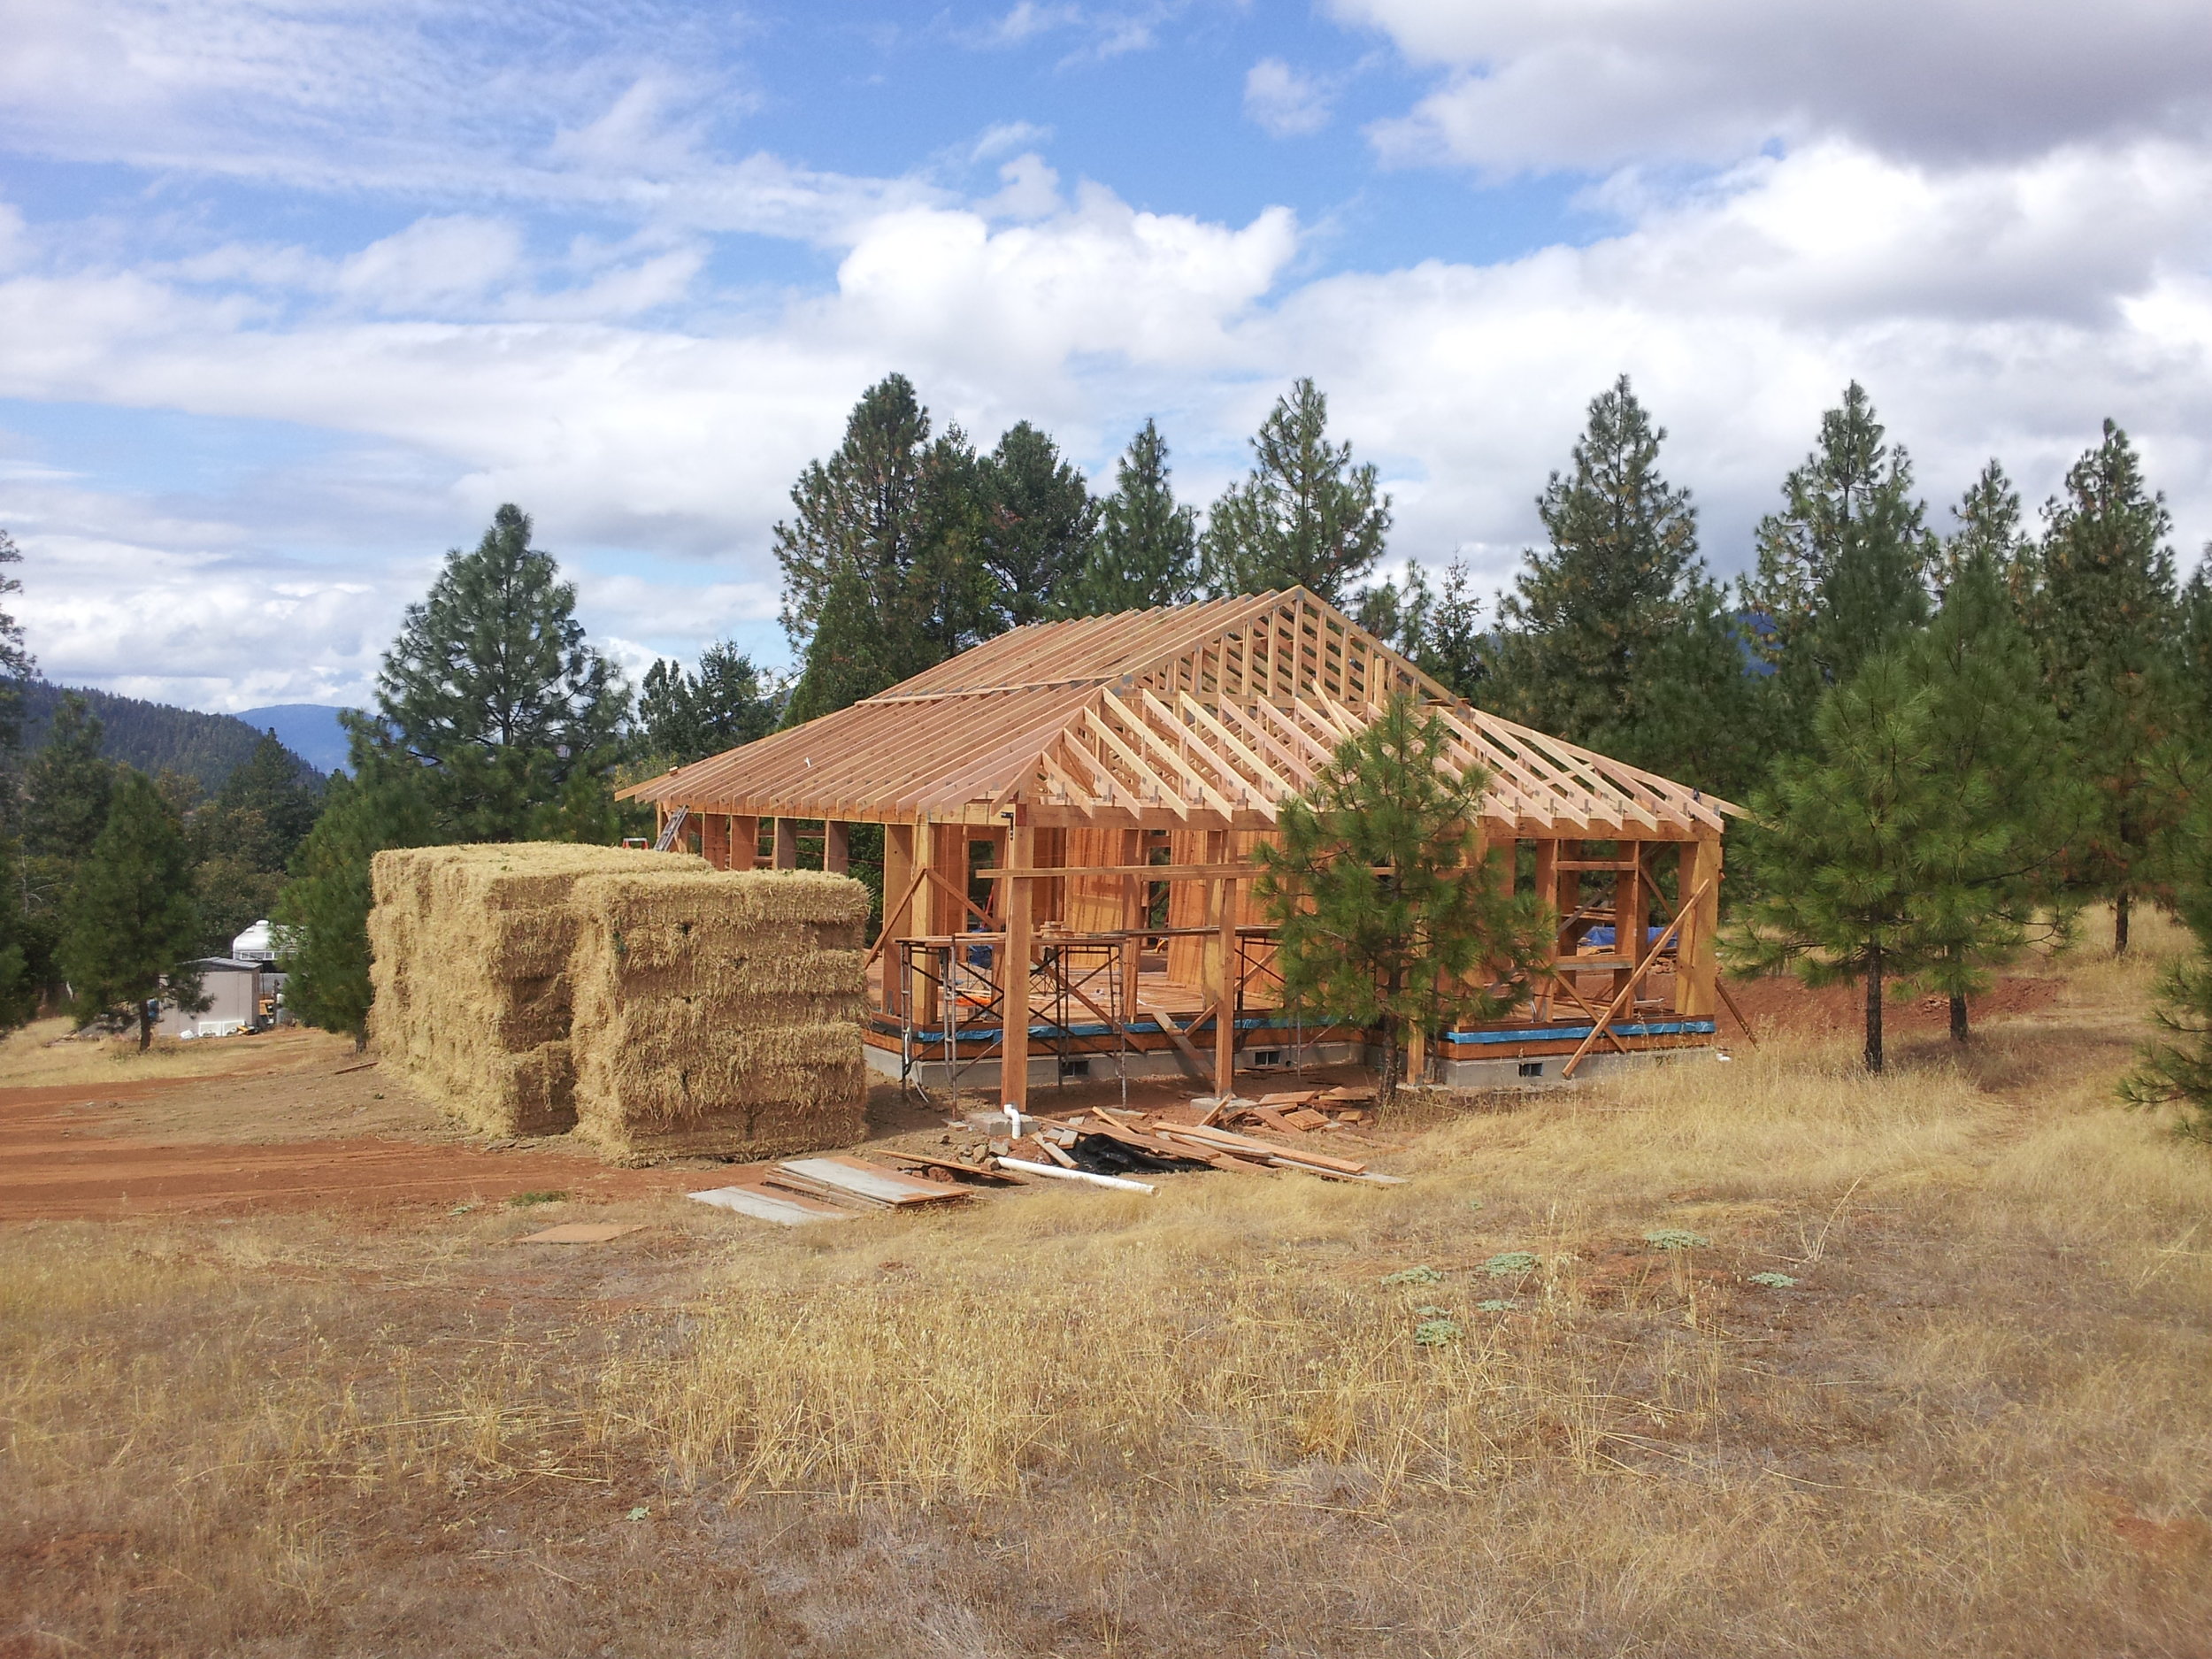  I-Joist or LVL type of post-and-beam system uses 3-string bales stacked on edge (15" wide) for maximum insulation value per inch of wall thickness. &nbsp;Uses straw bale shear wall and interior partition shear walls. 